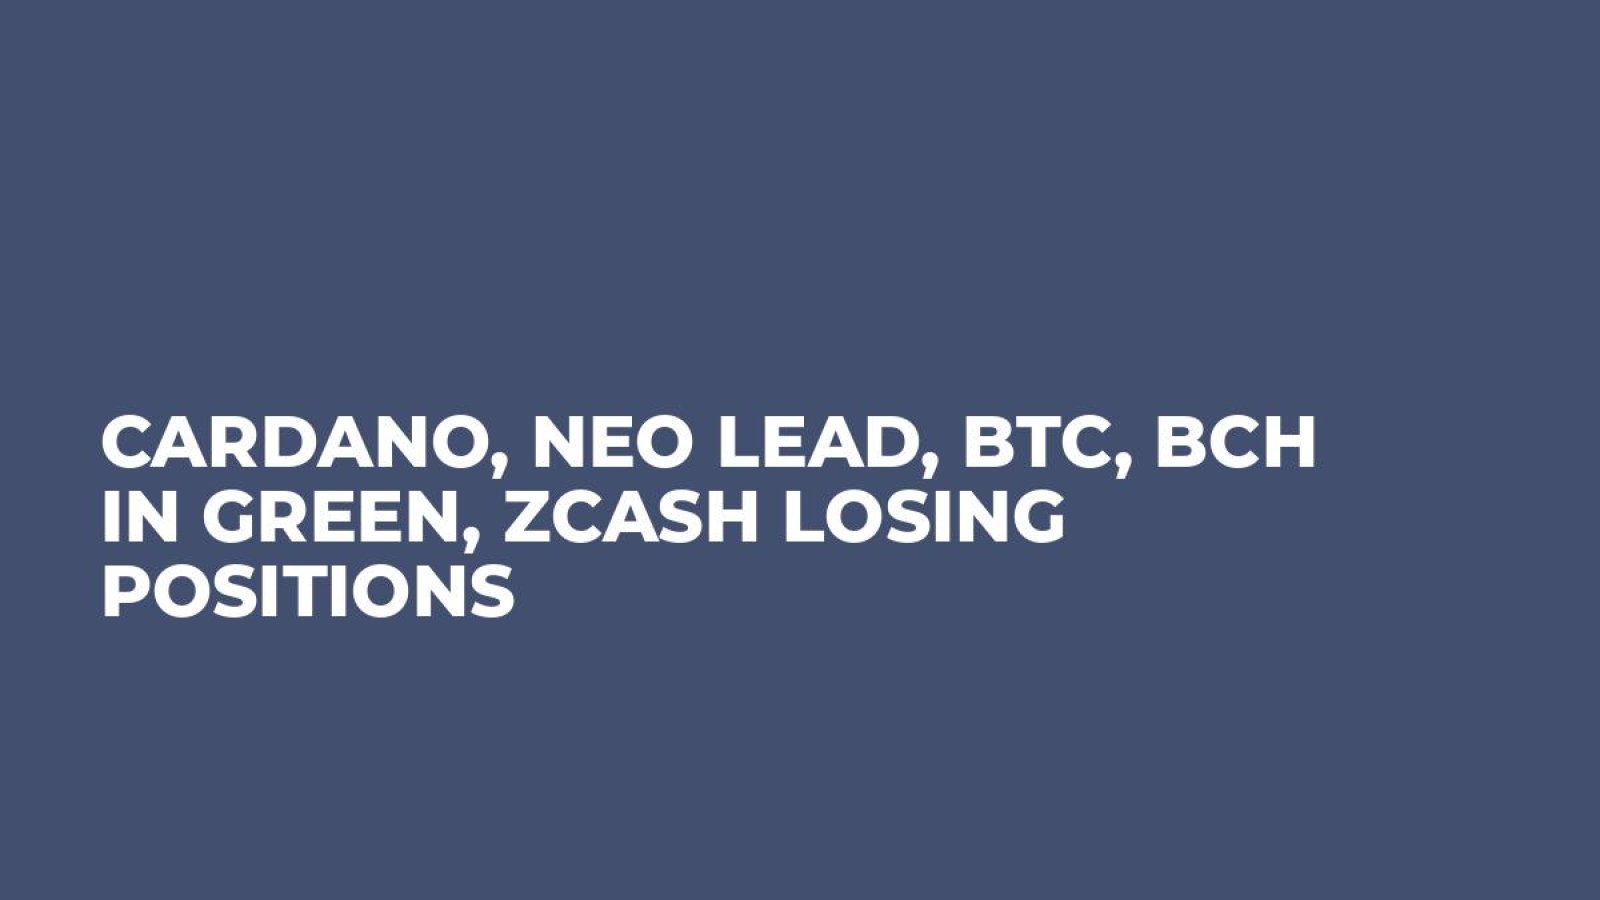 Cardano, Neo Lead, BTC, BCH in Green, Zcash Losing Positions